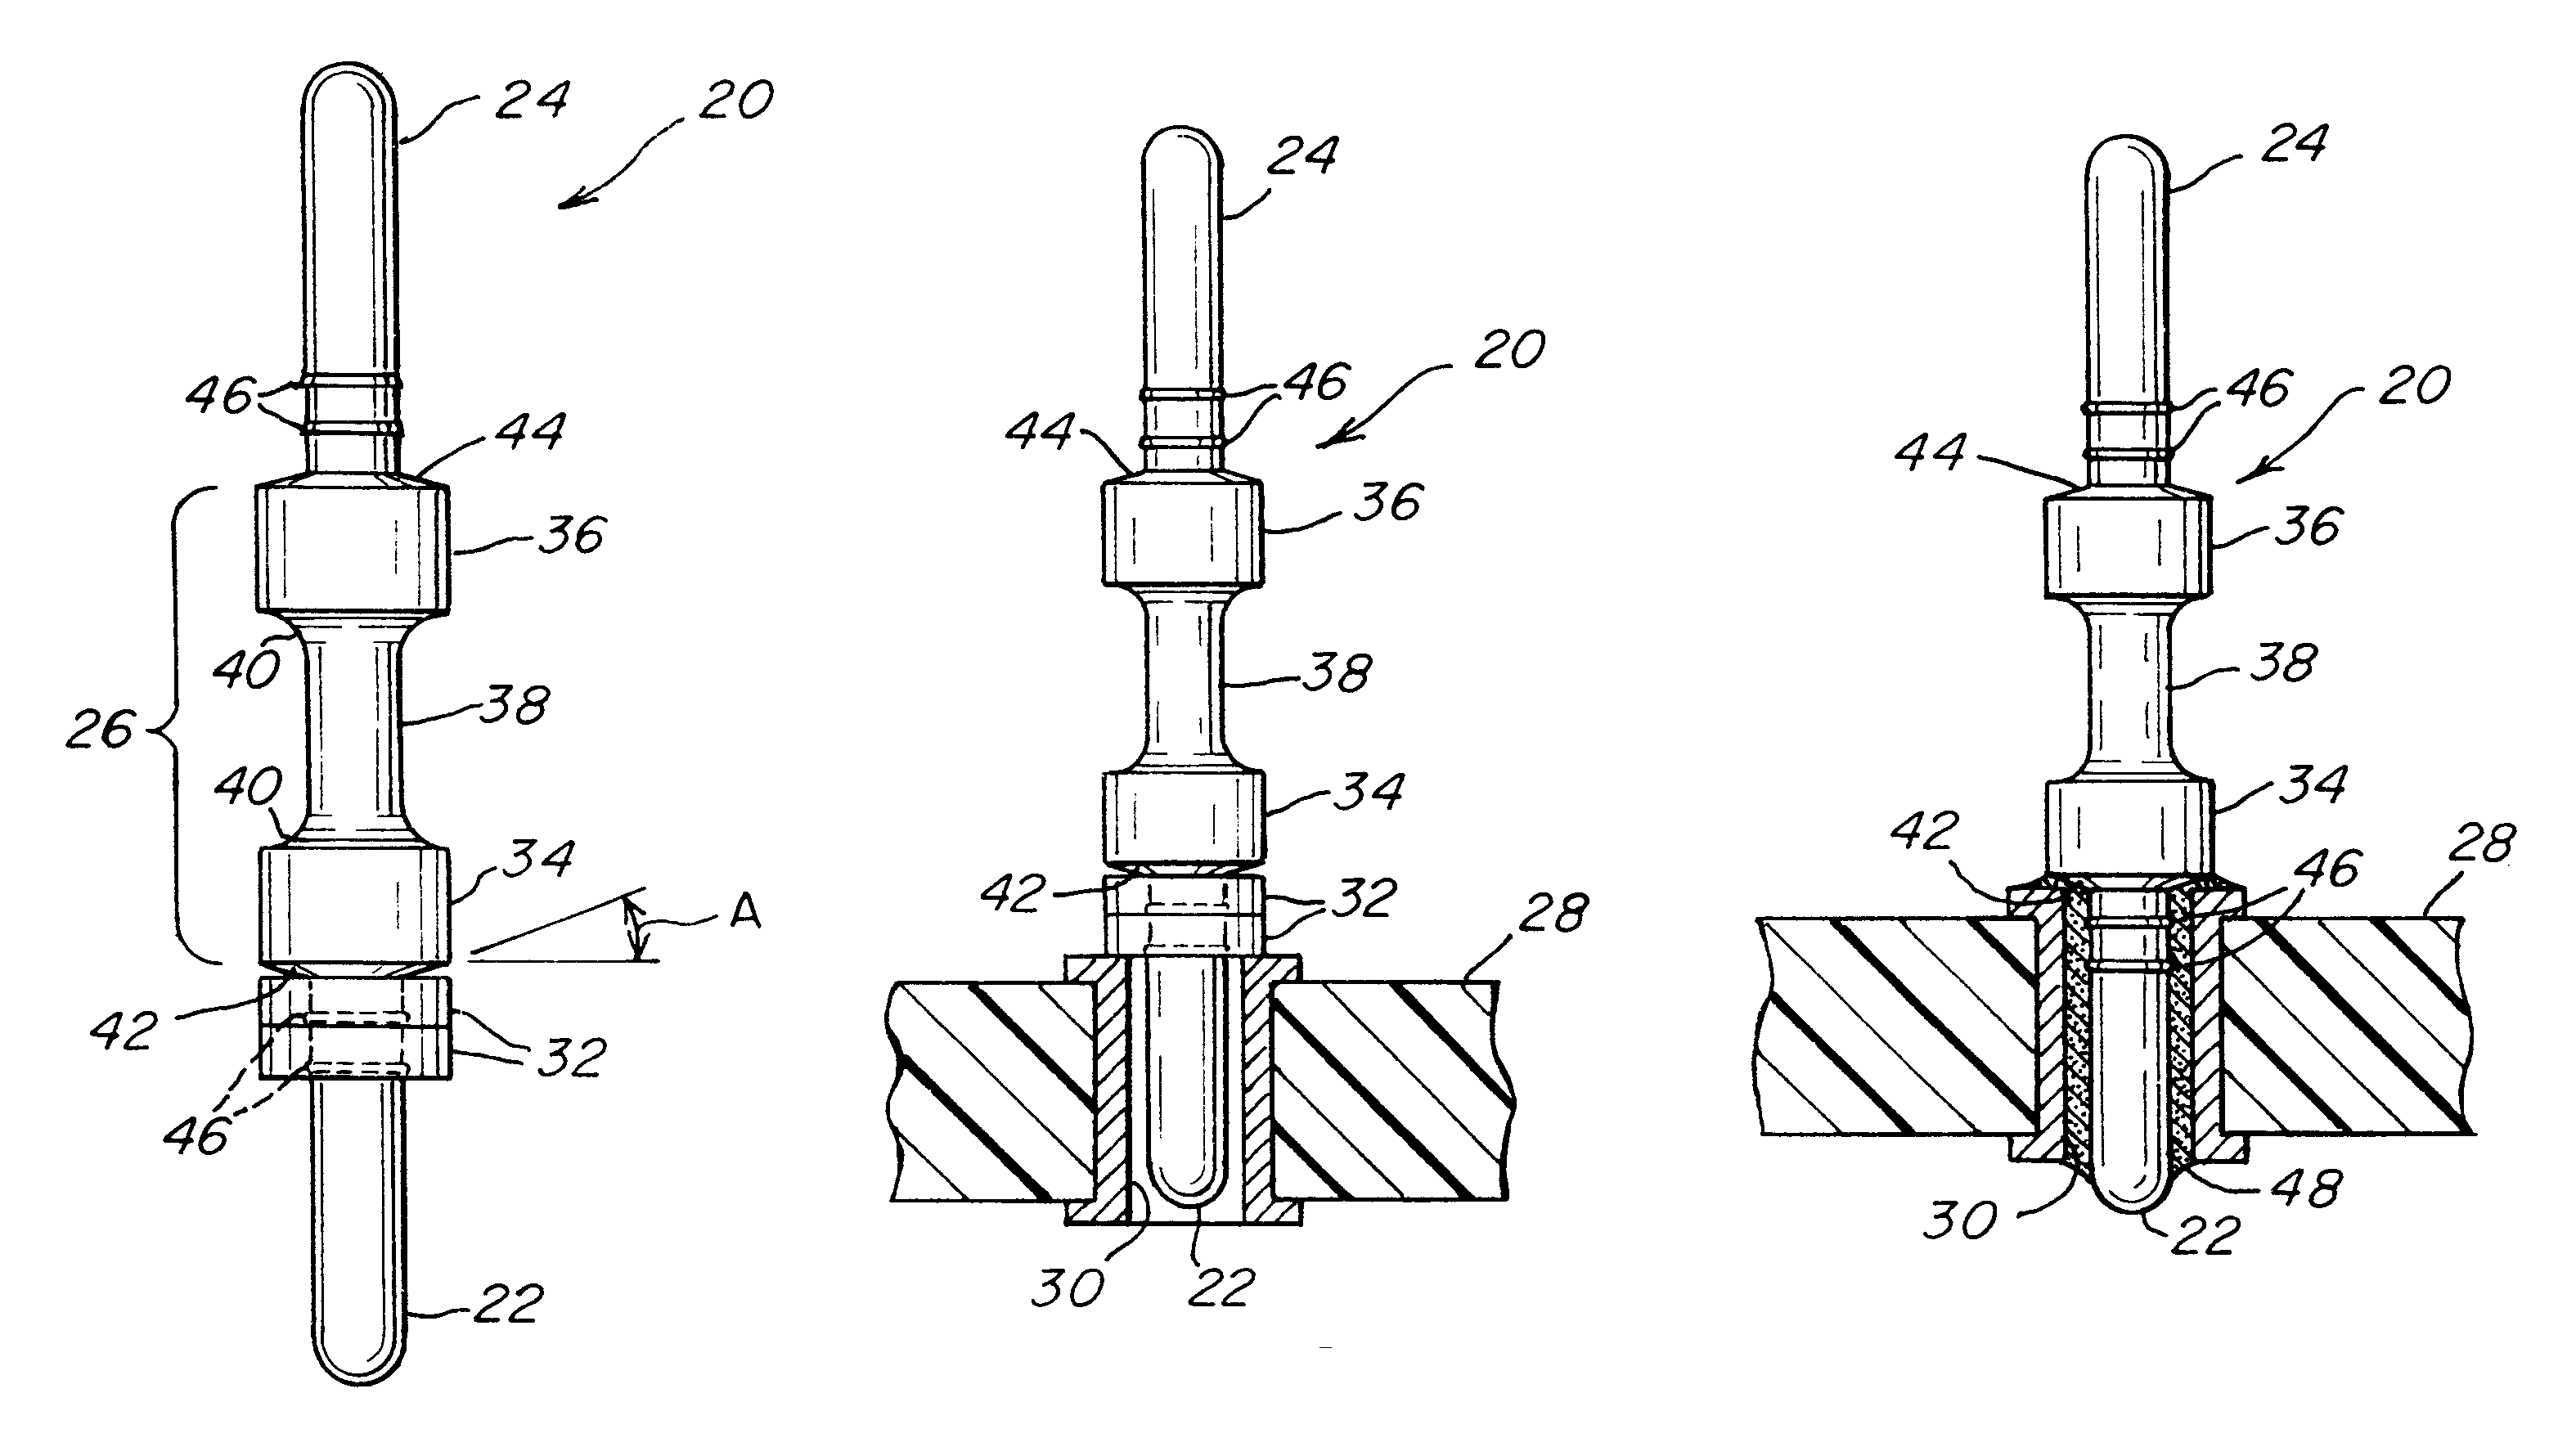 Electrical contact for a printed circuit board